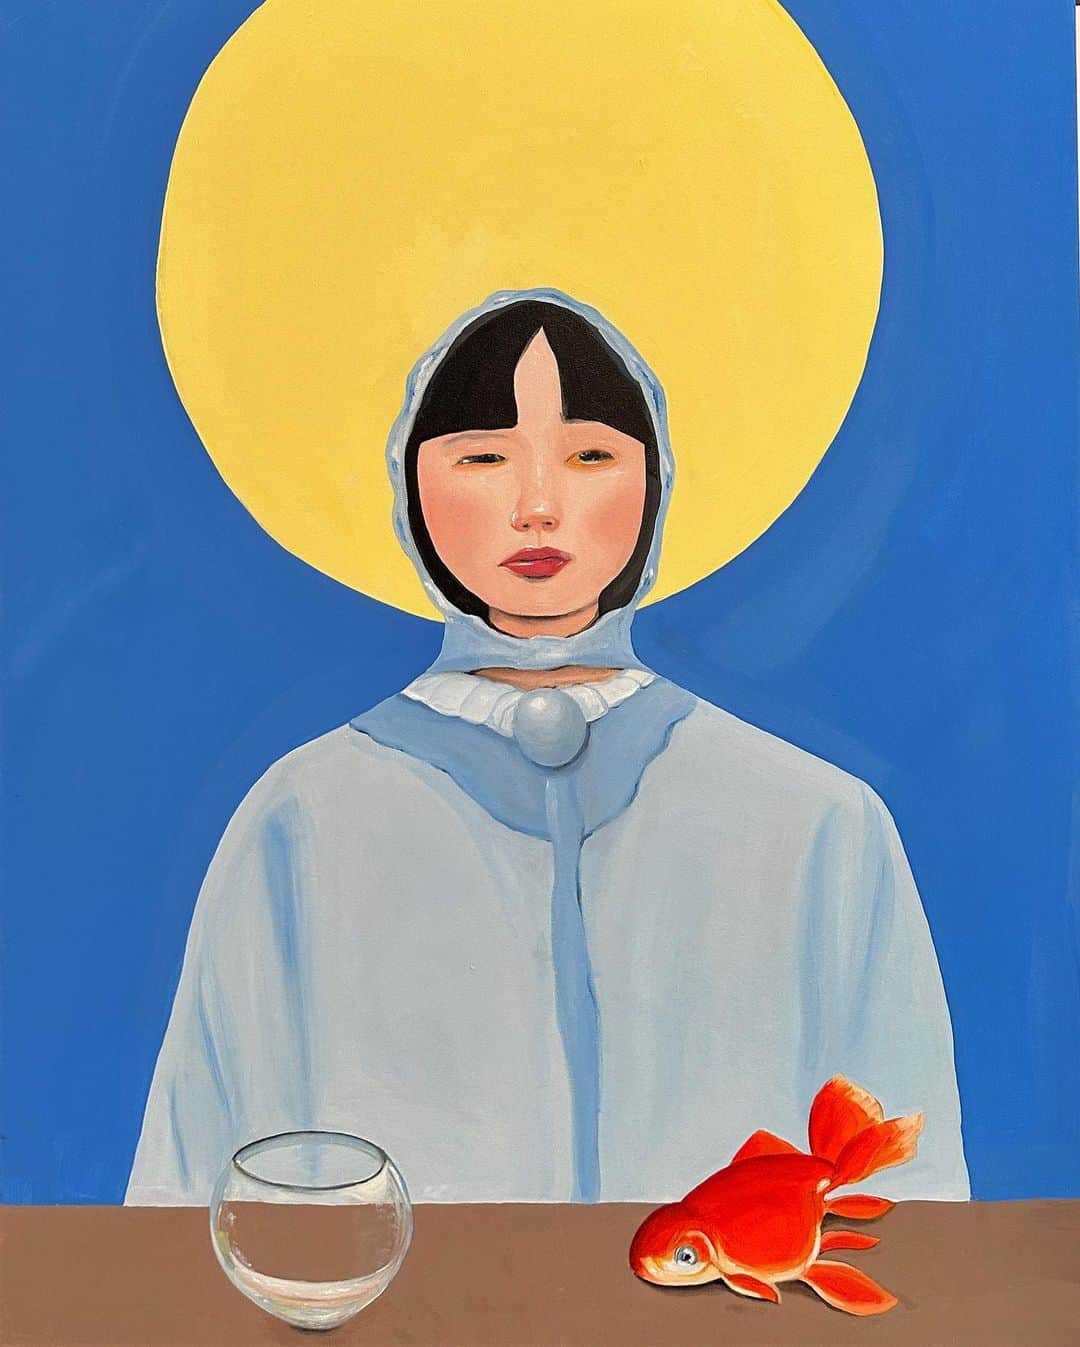 Irene Norenのインスタグラム：「Interrupted Oil on canvas  "Interrupted" is a poignant account of a young girl's journey to womanhood, forced upon her at an early age. Face with societal pressures to grow up too quickly, she feels like a fish out of water in a world that doesn't understand her struggles. The pearl on her necklace serves as a reminder of her innocence, a visible symbol of the profound changes she has undergone. A brave and moving portrayal of the challenger faced by young woman in an unforgiving world」